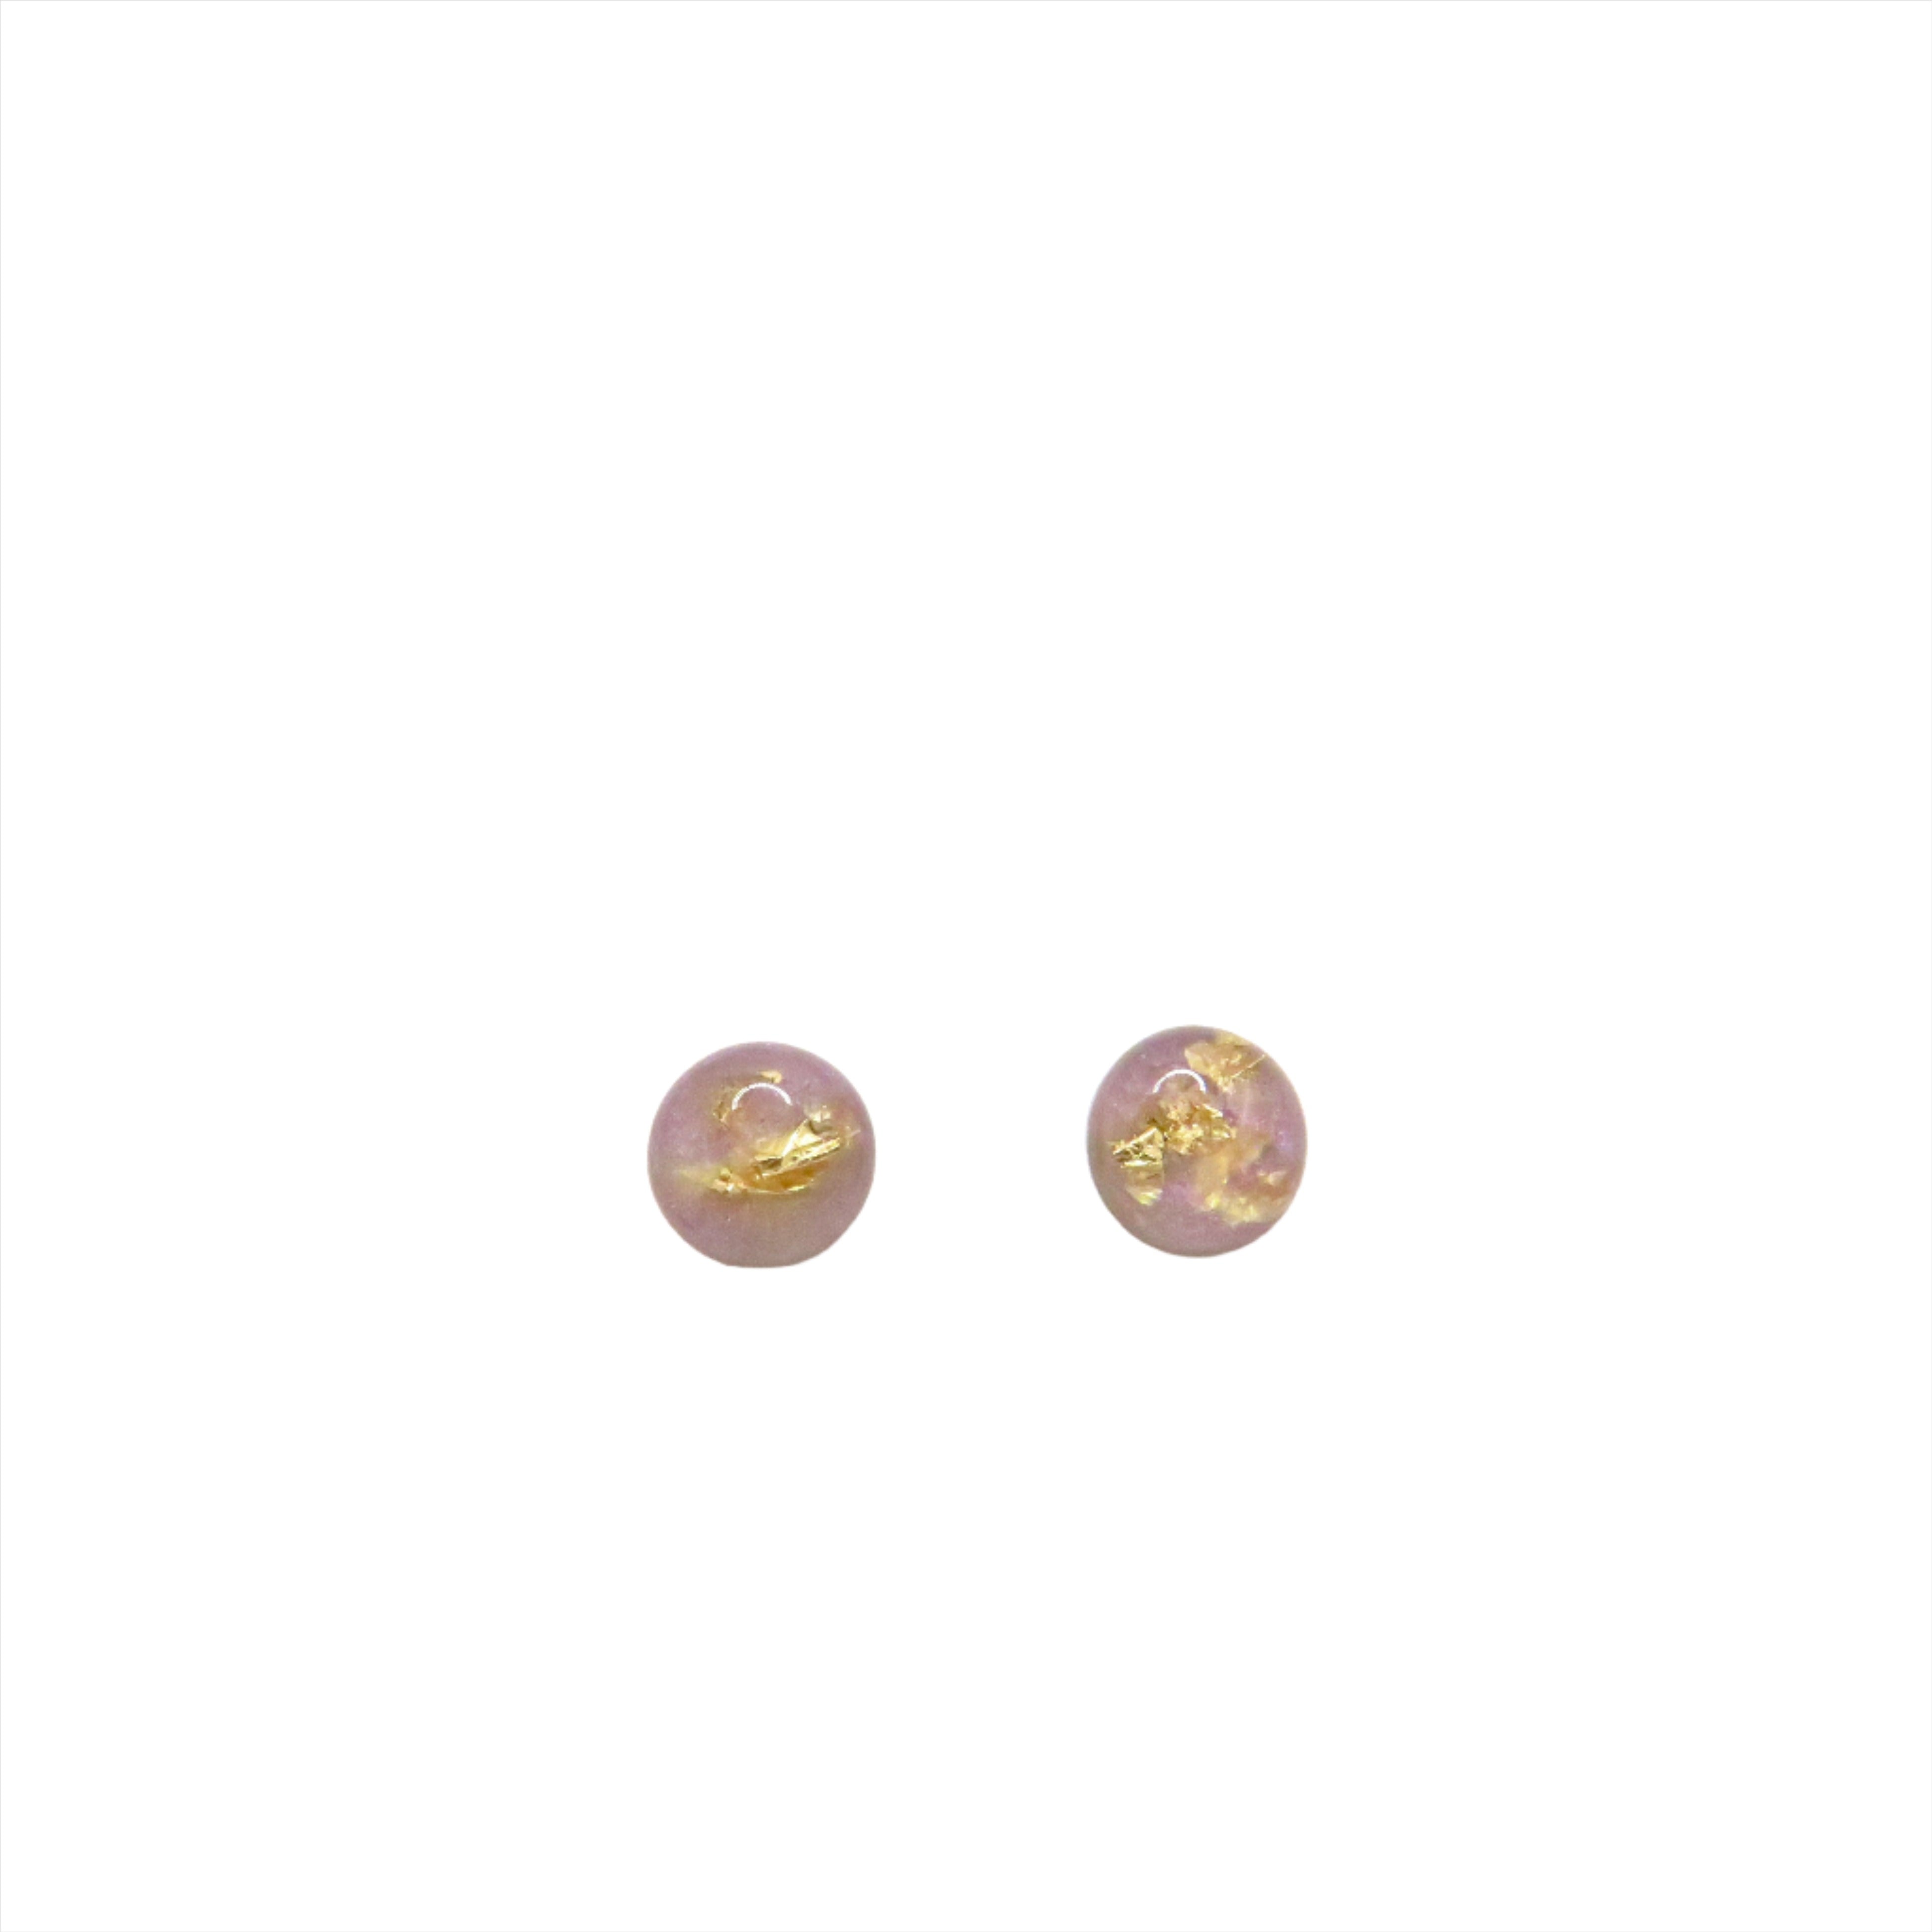 6mm Round Crushed Gemstone Stud Earrings | Assorted Stones